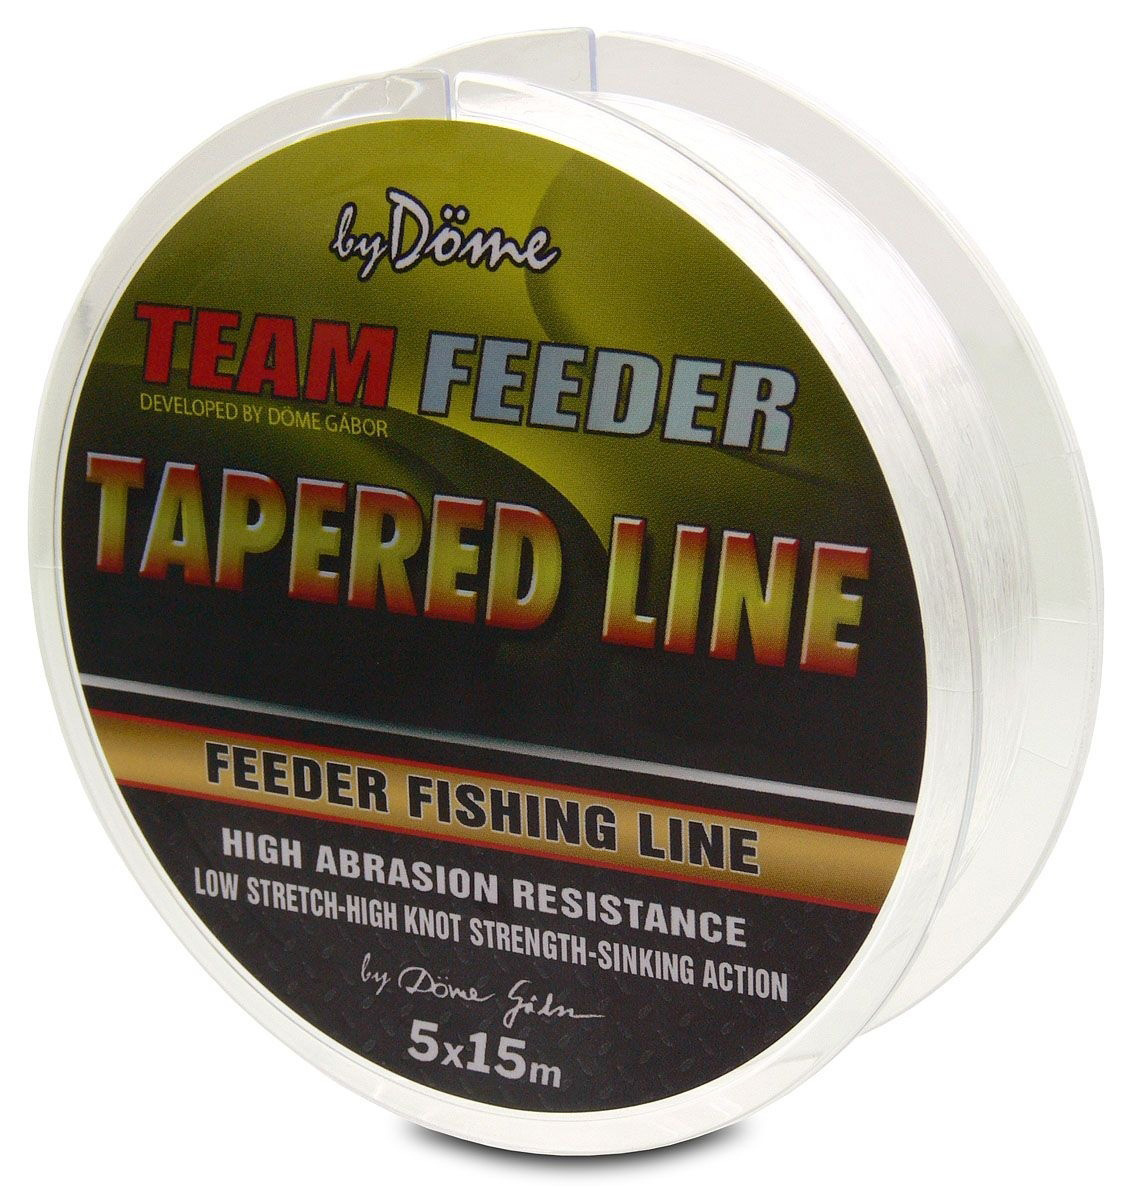 BY DÖME TEAM FEEDER TAPERED LINE 0,195-0,28MM